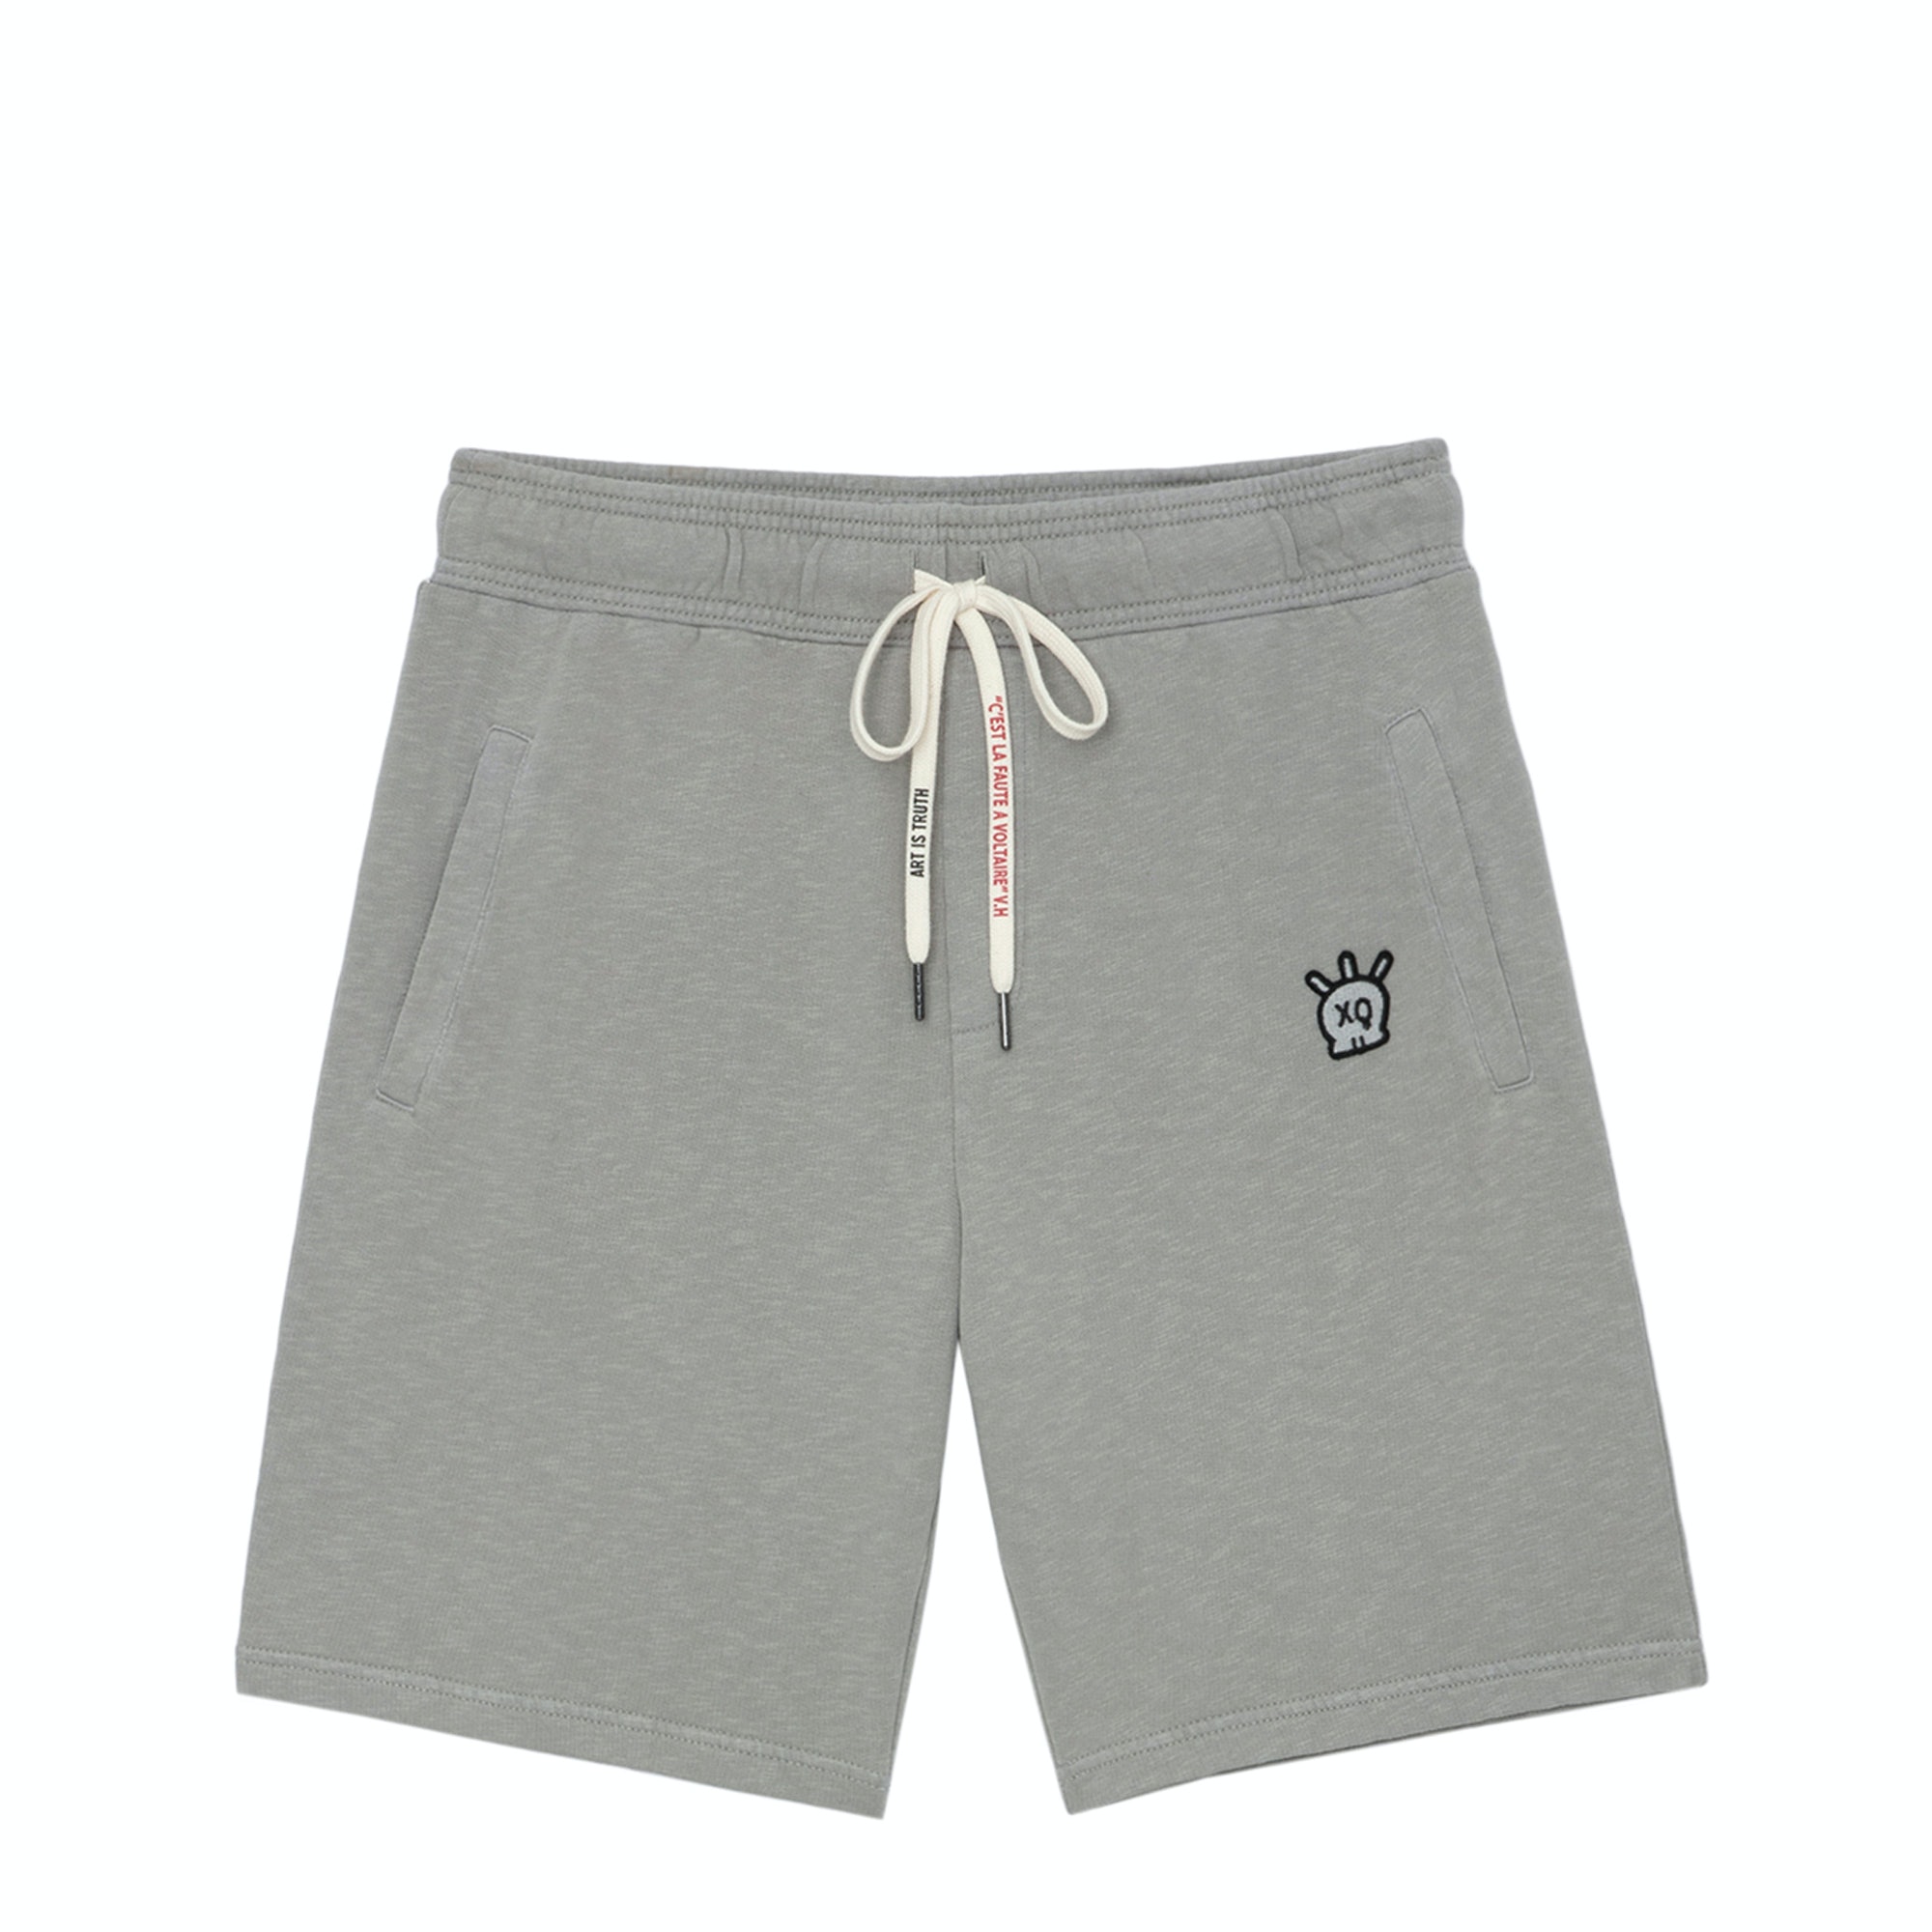 Short Party Skull Gris Clair - Taille Xs - Homme